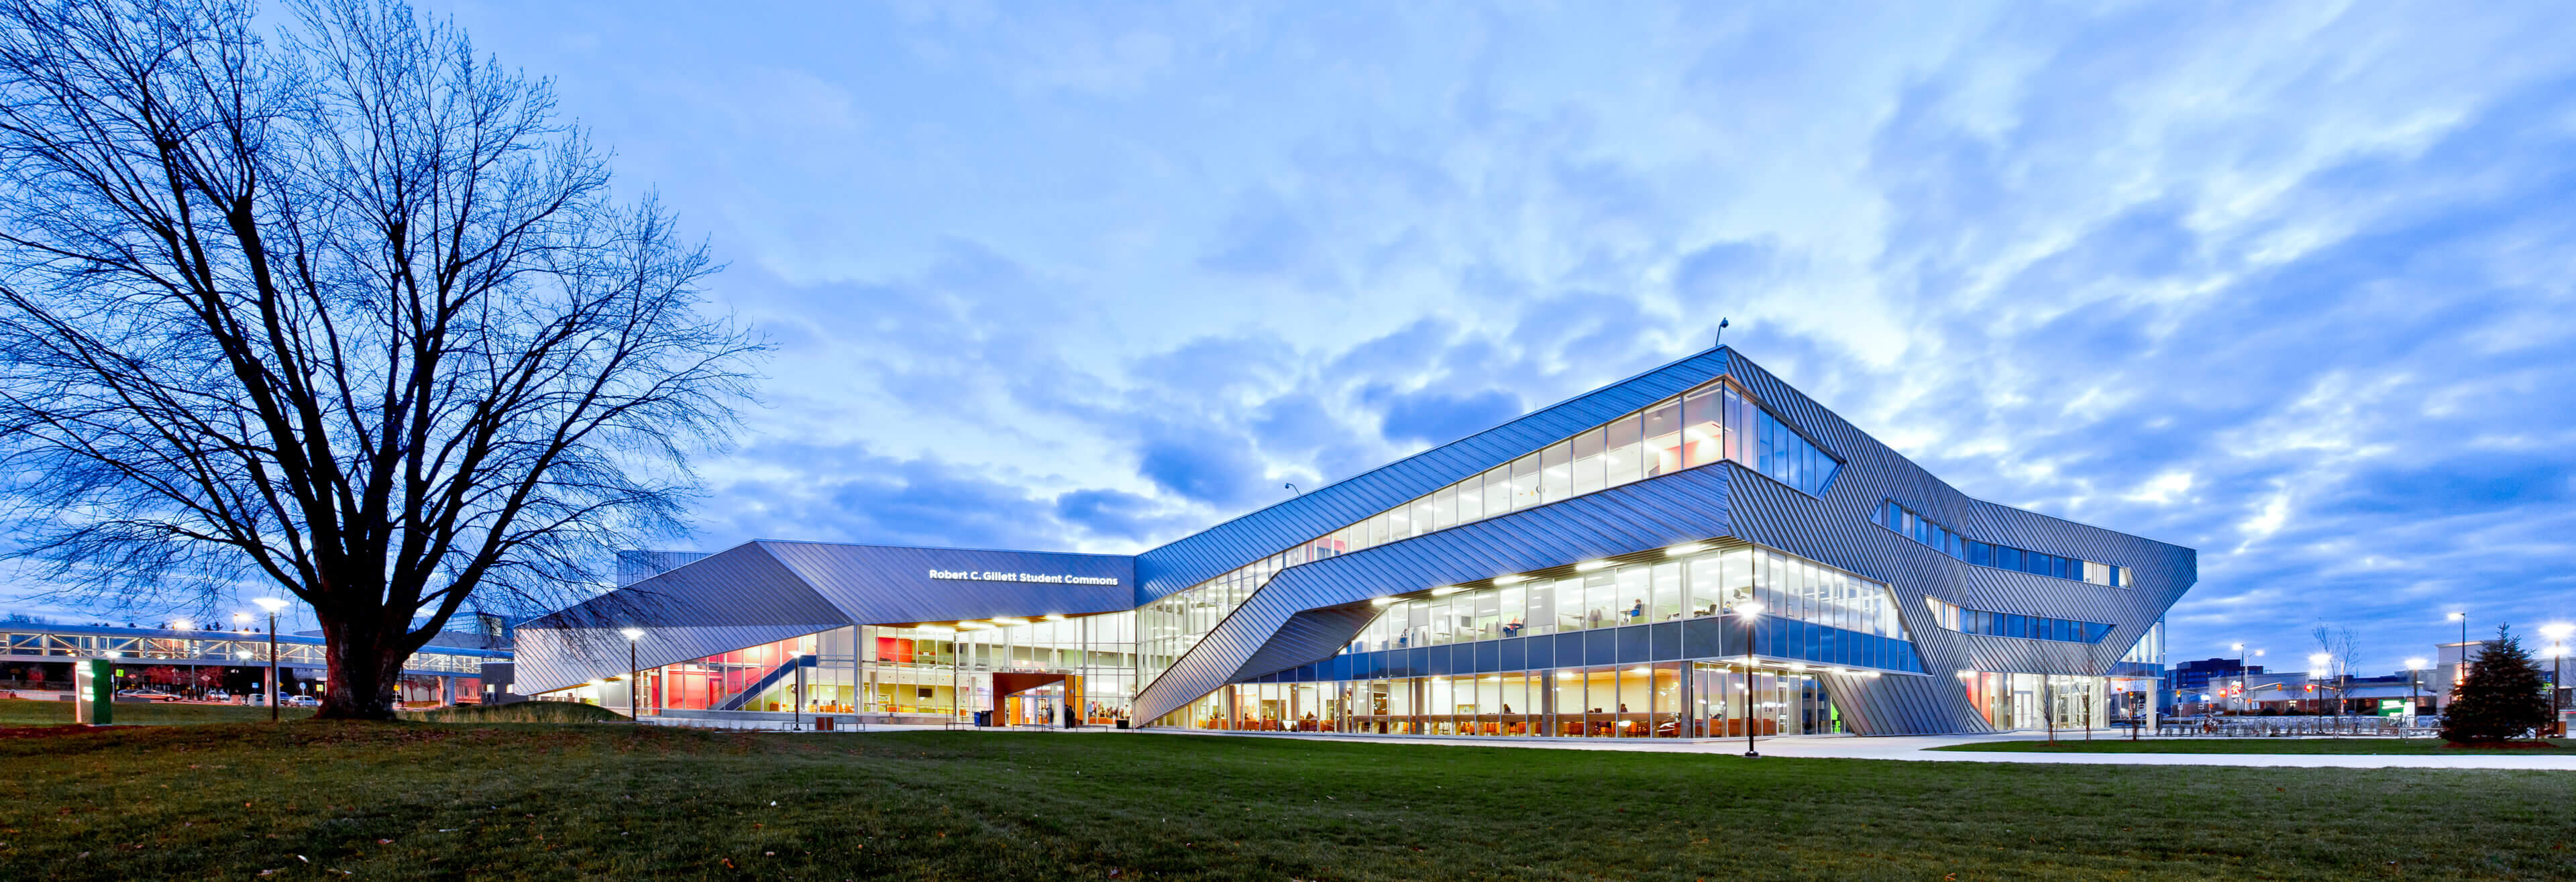 Algonquin College Student Commons Building